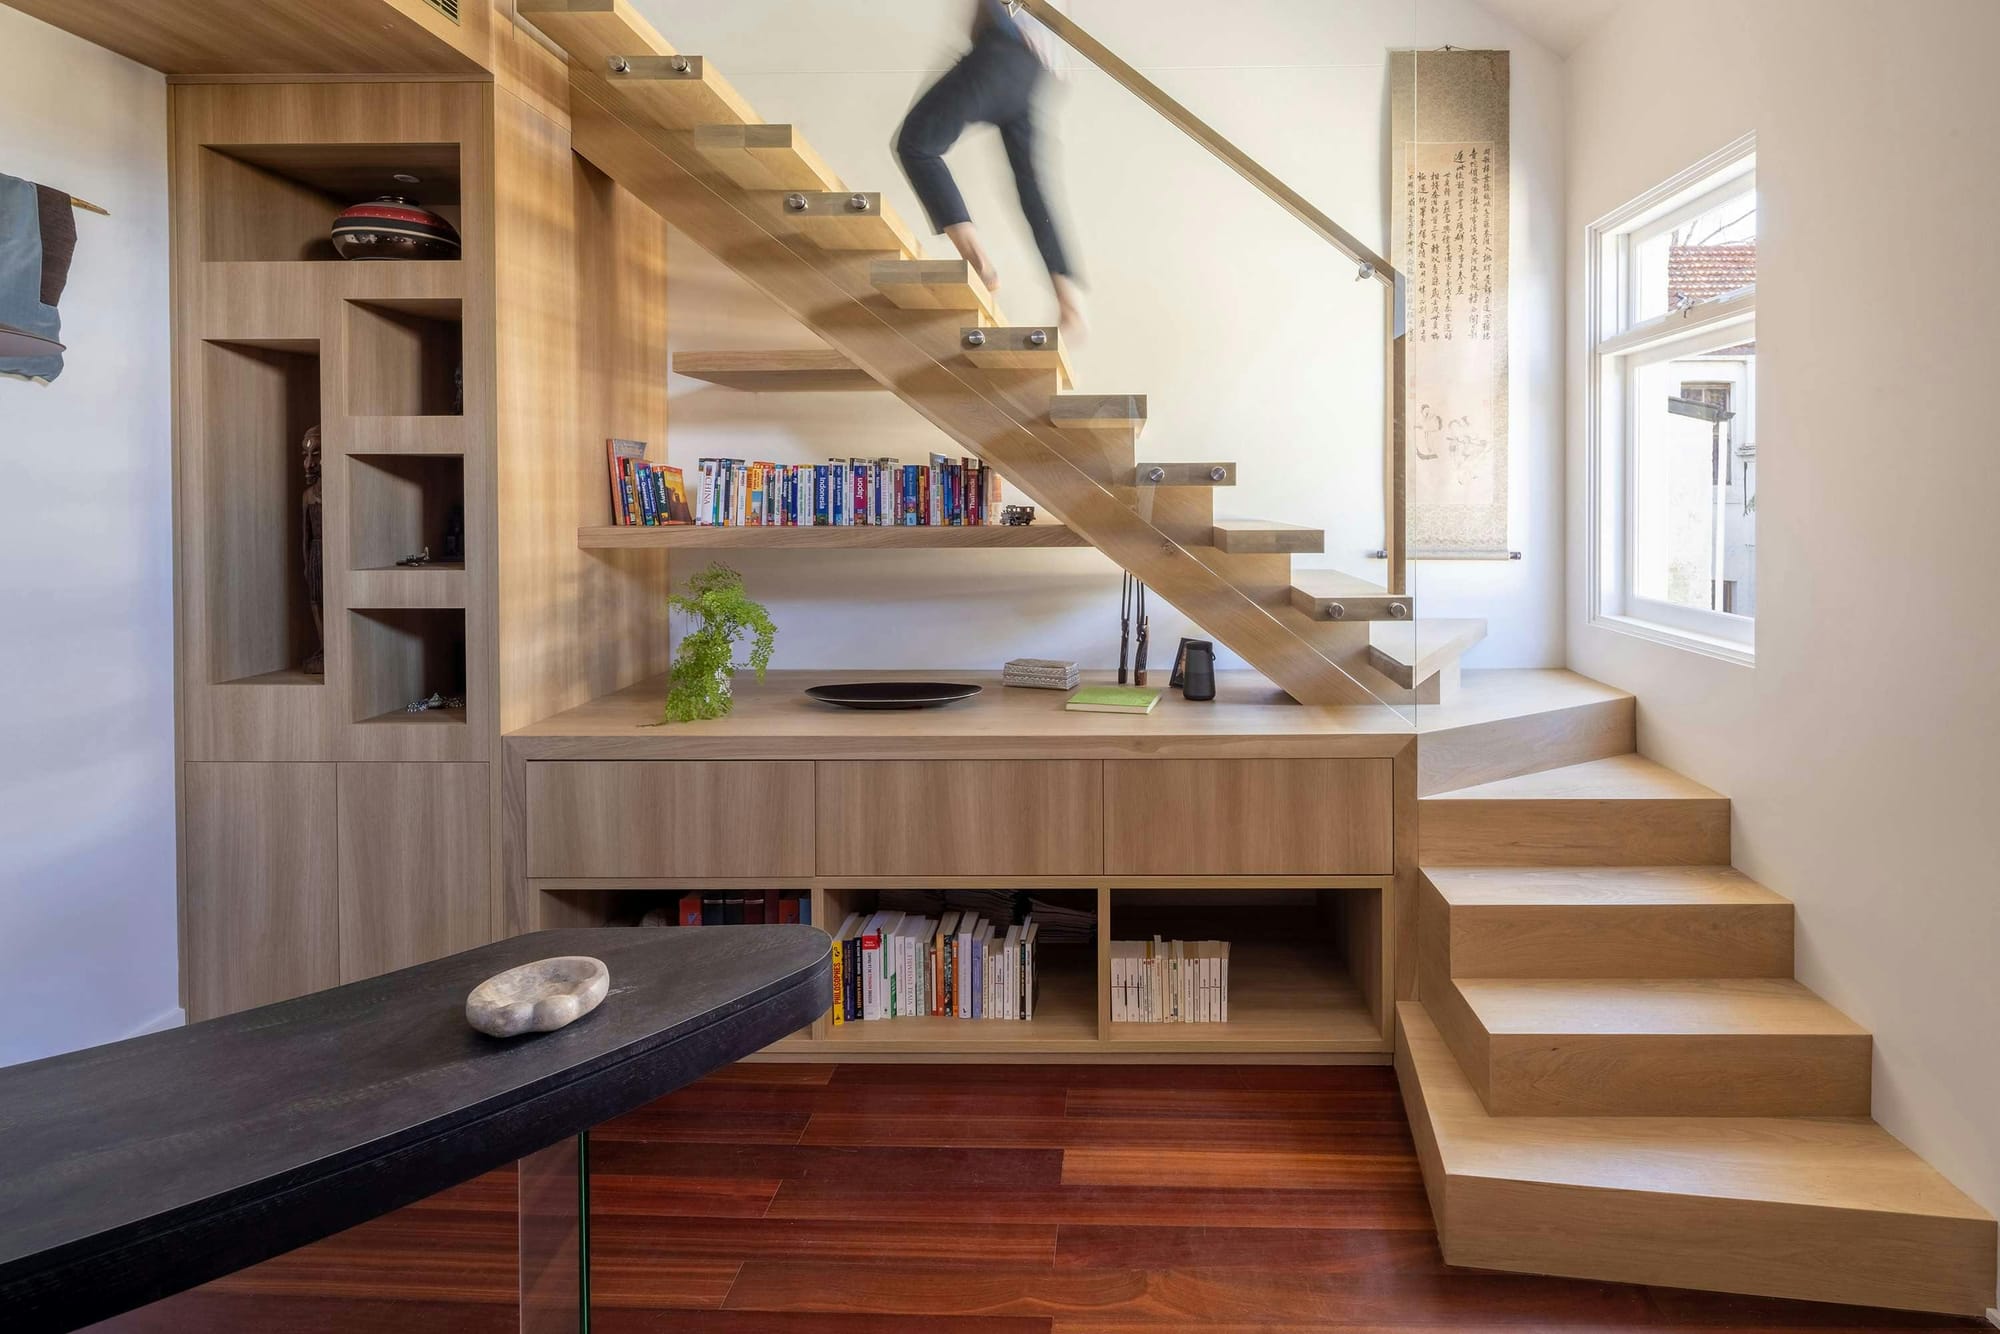 An interior shot of the new timber stair showing a person walking up